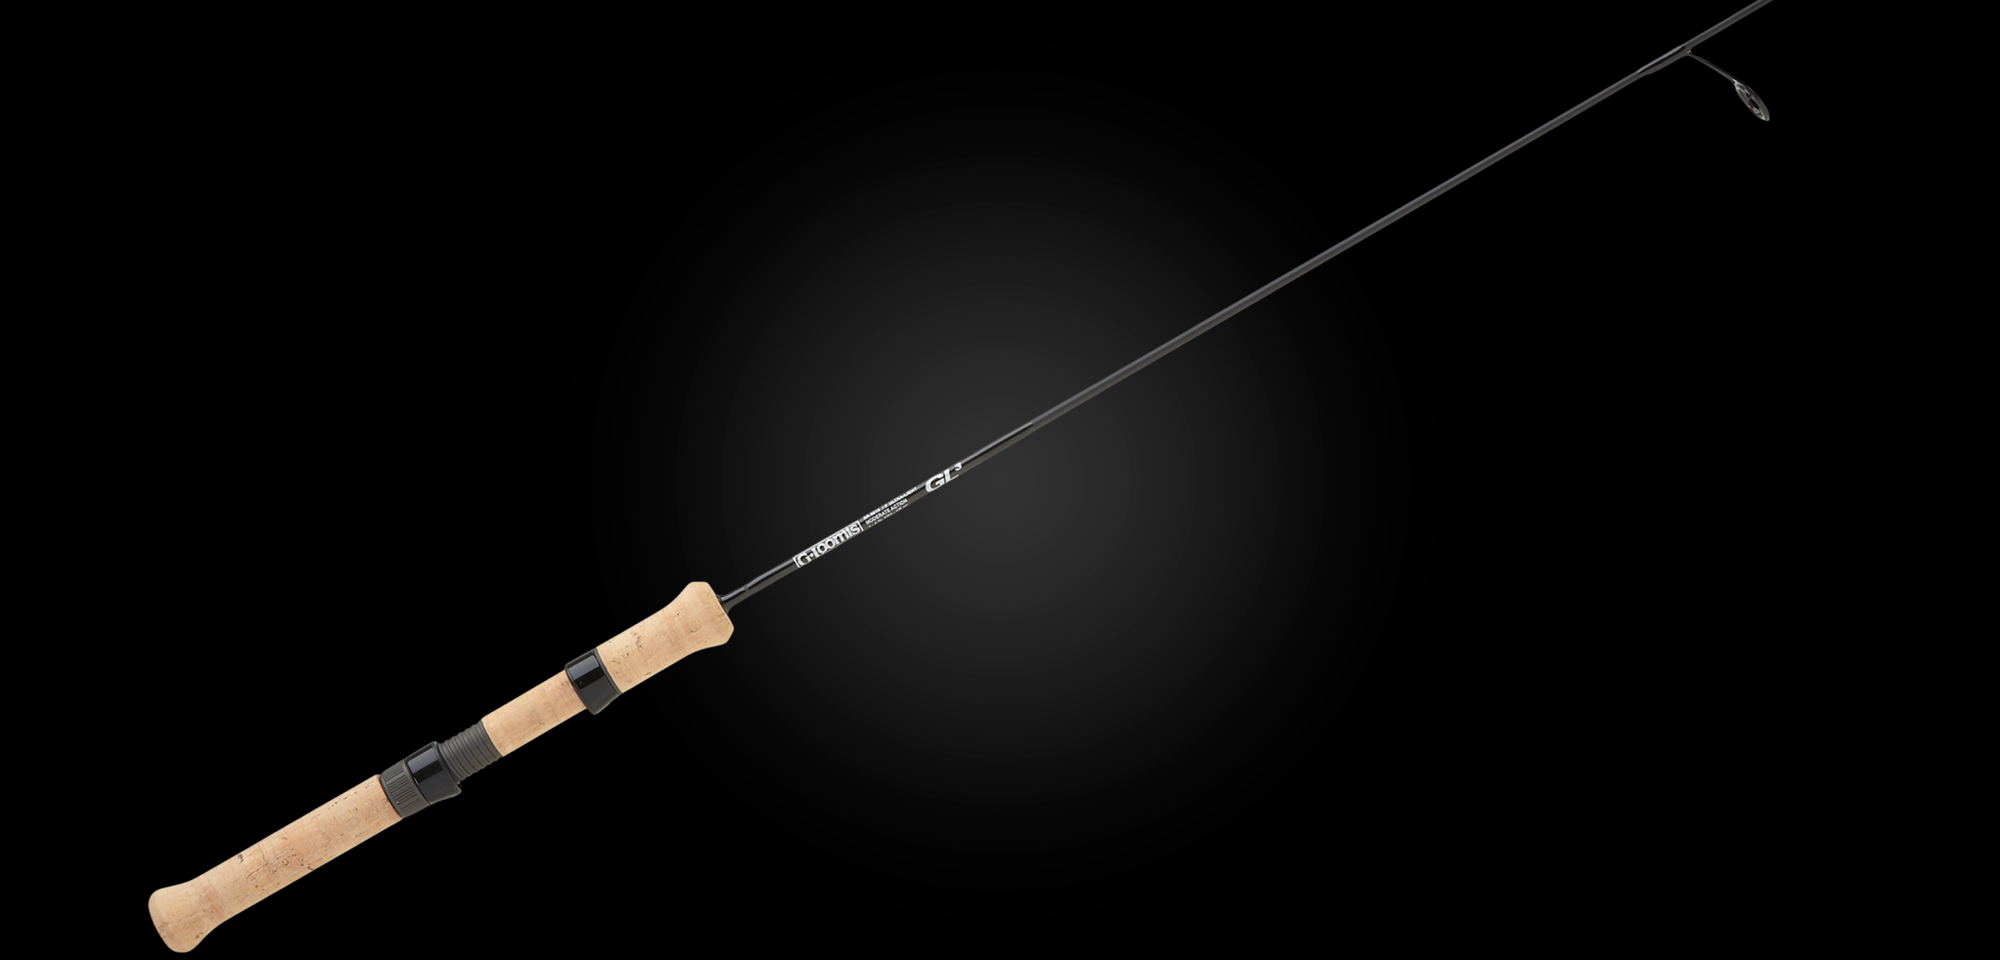 Trout Fishing Rods –